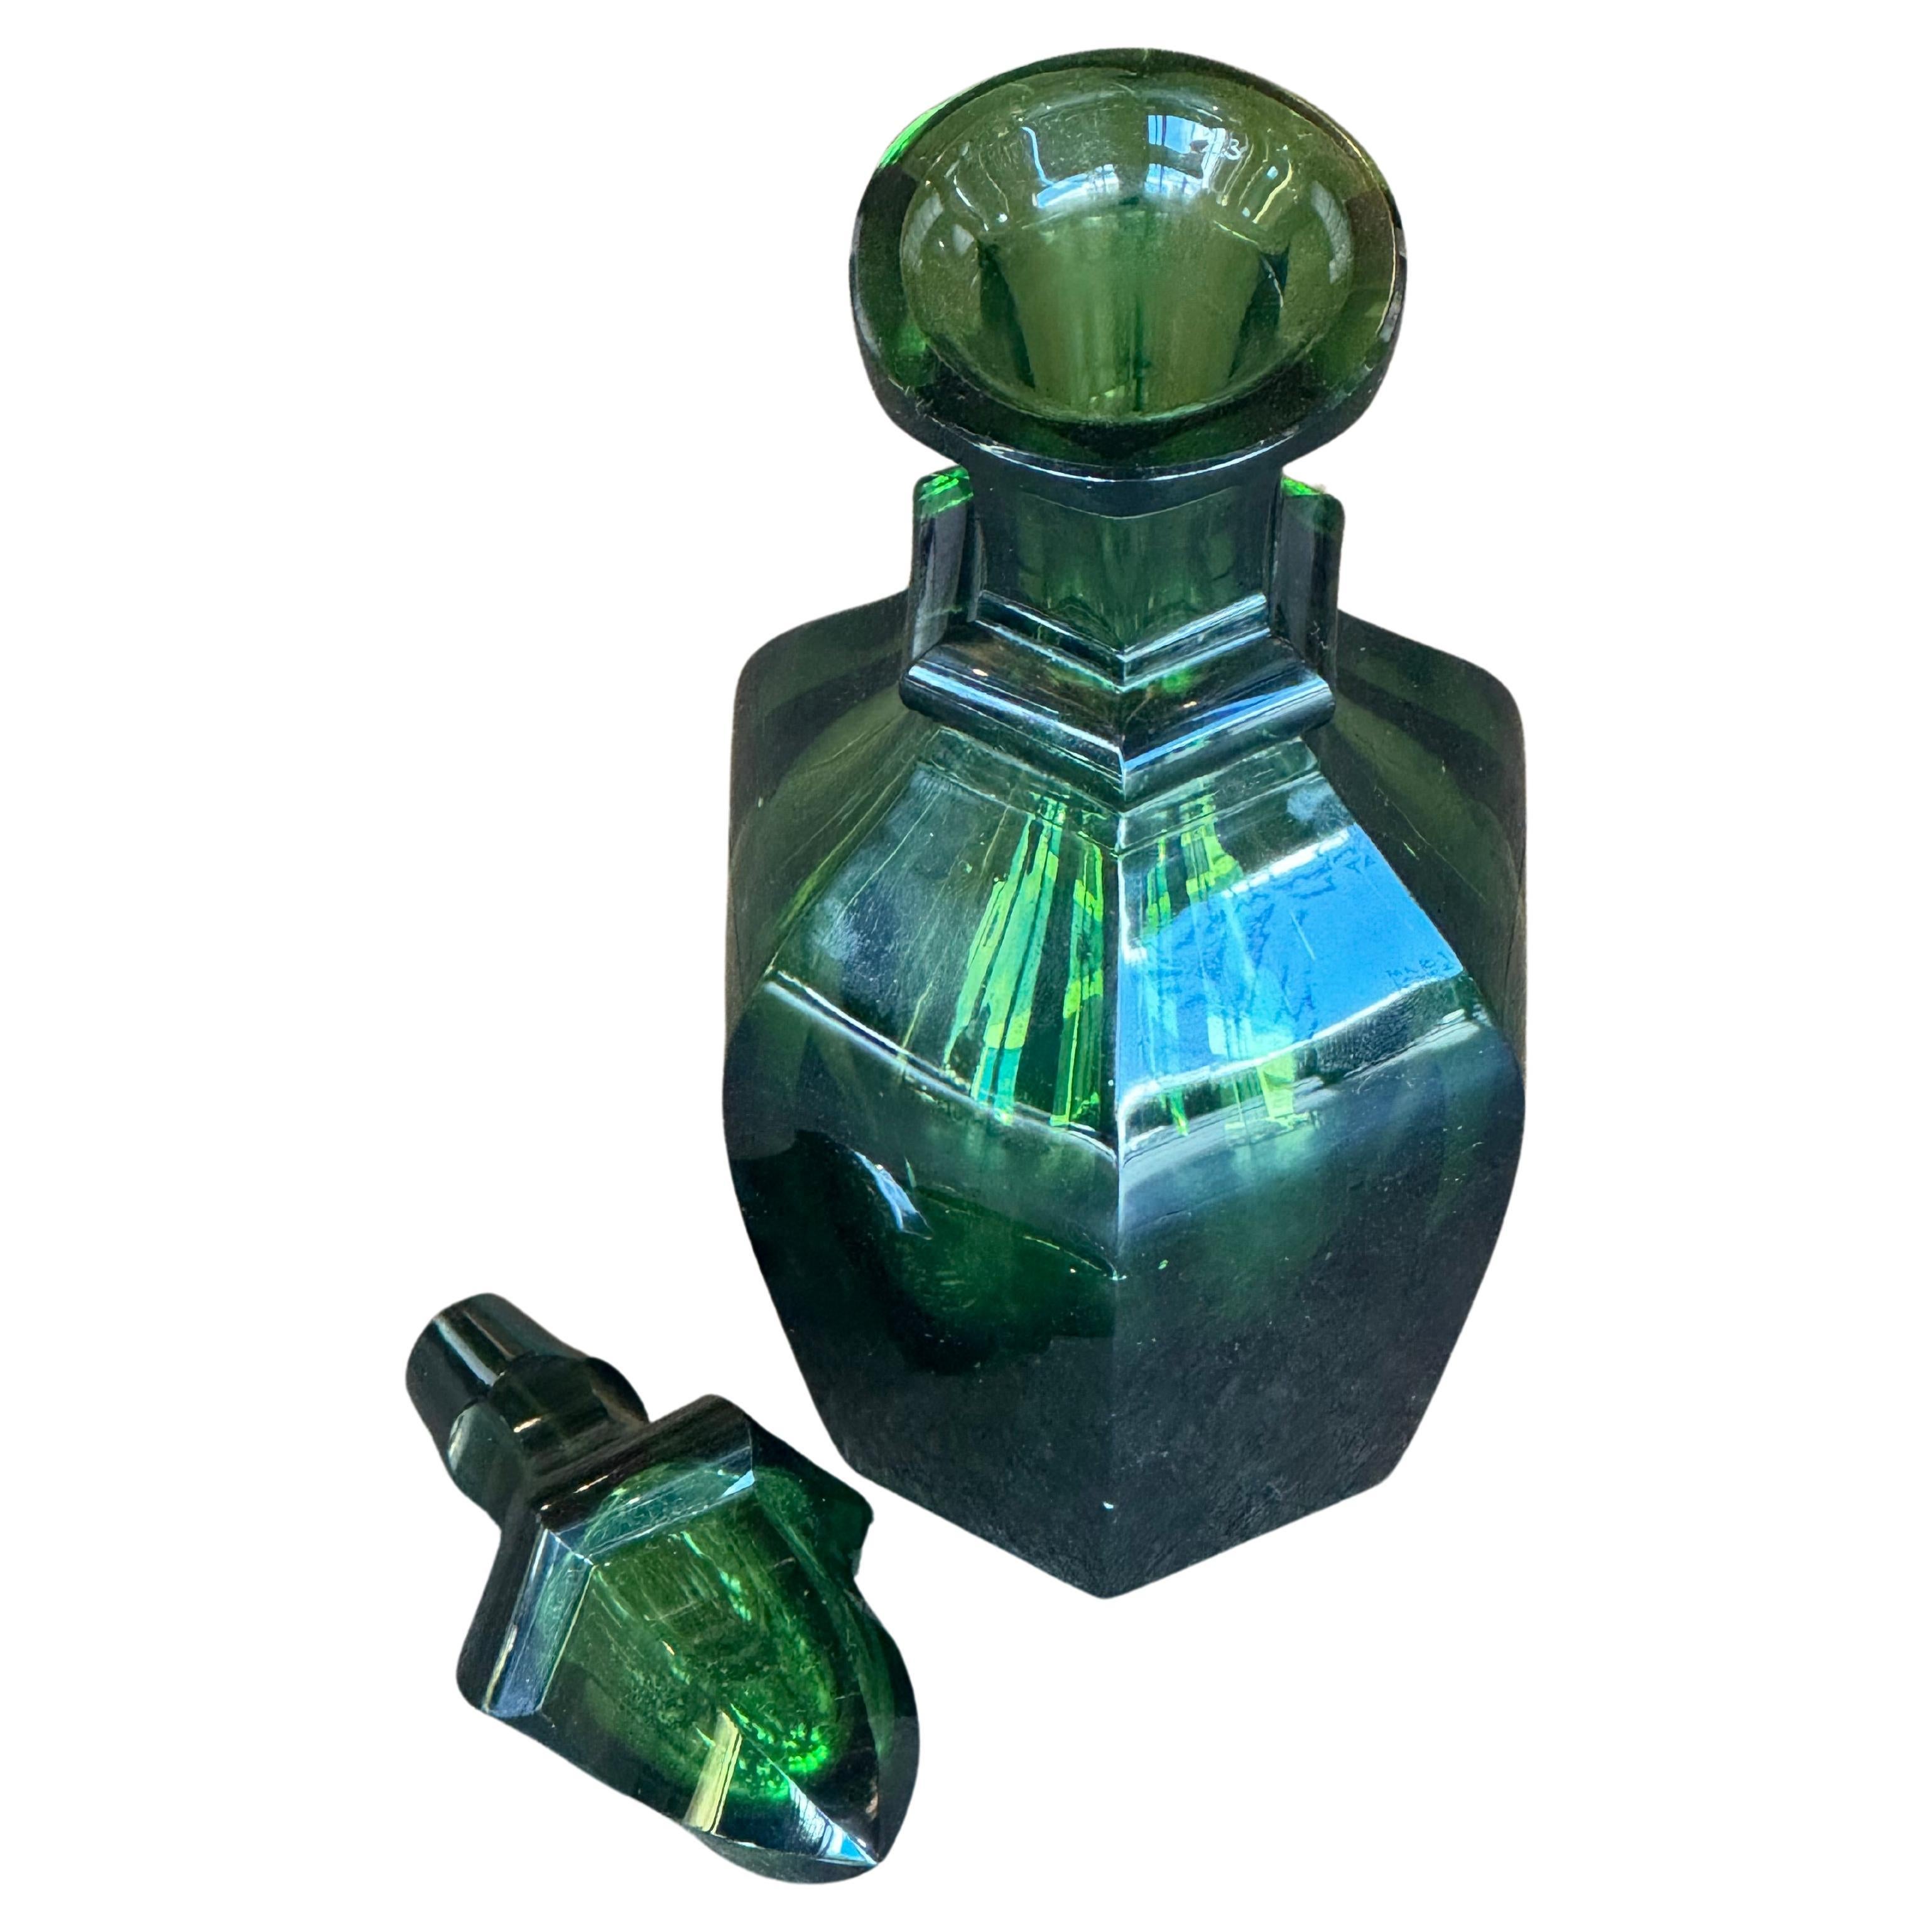 Hand Blown Emerald Green Murano Decanter
Sourced from Italy by Martyn Lawrence Bullard
